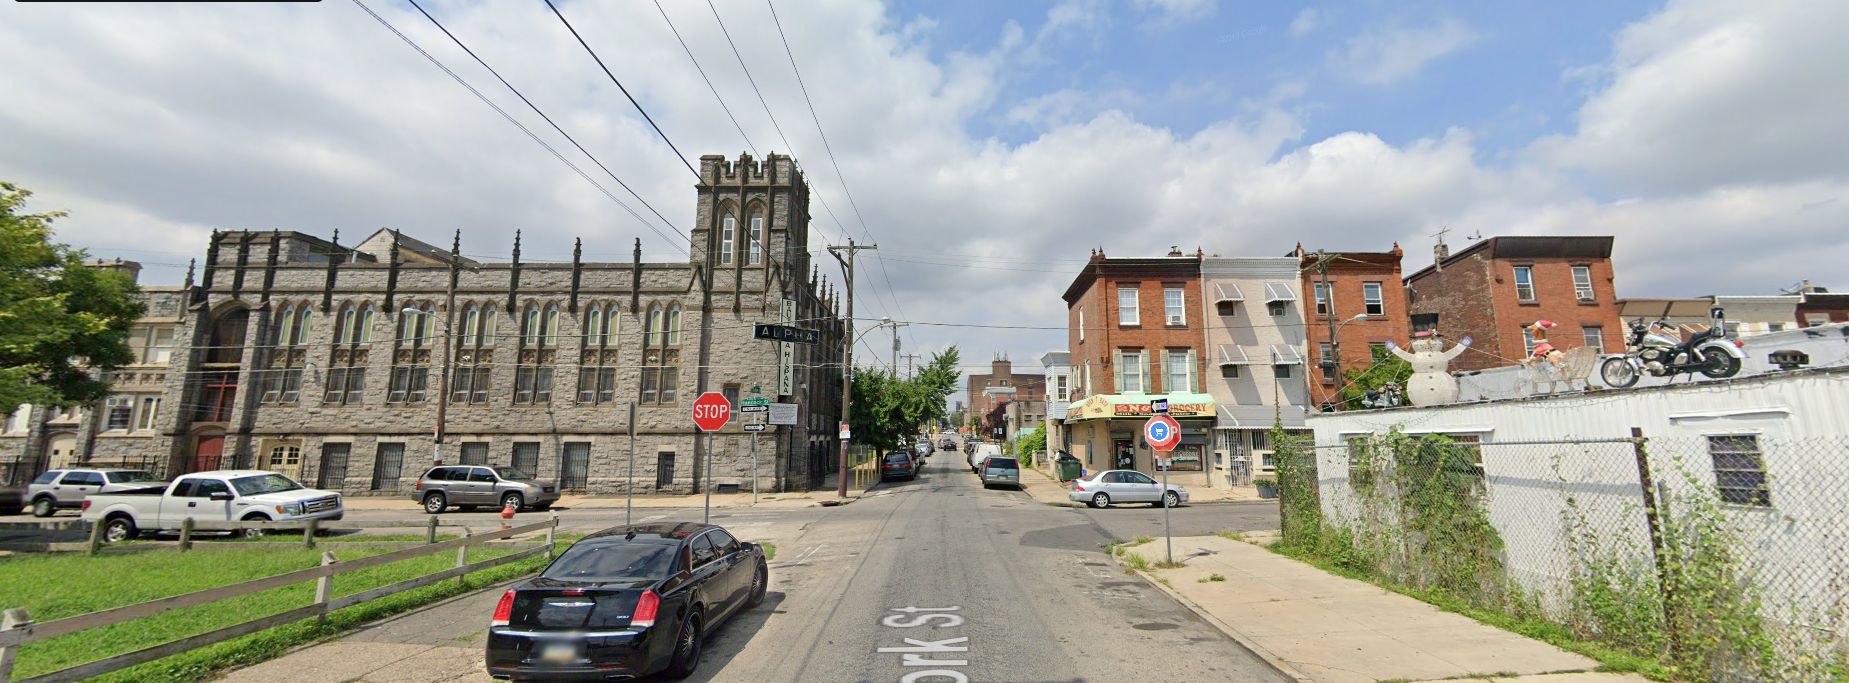 North Hancock Street, with 2401 North Hancock Street on the right, prior to the latter's redevelopment. Looking west. August 2019. Credit: Google Maps